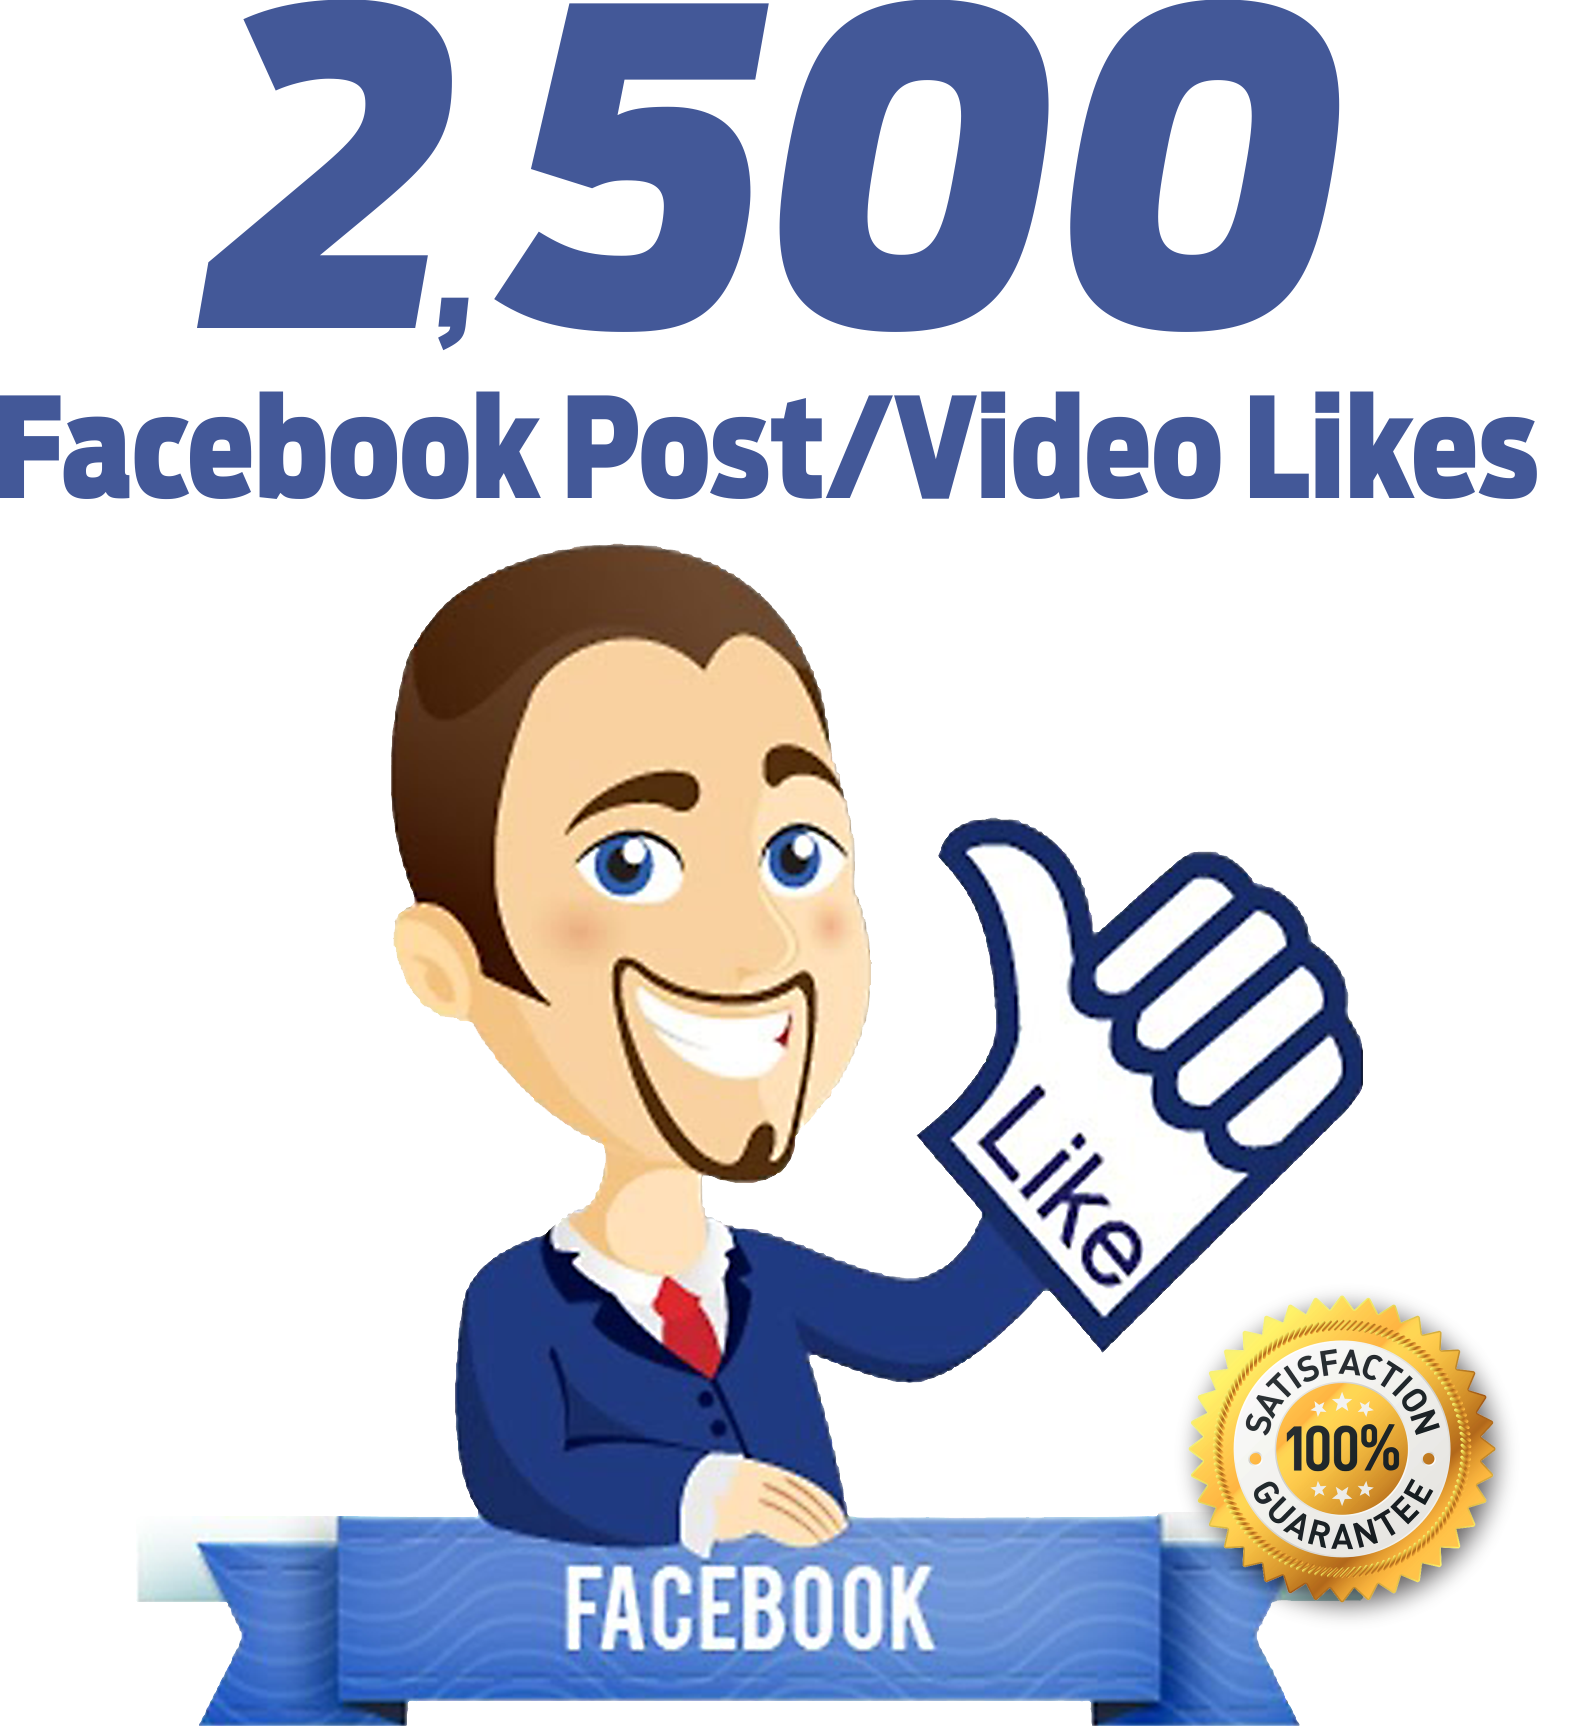 2500 facebook post video likes